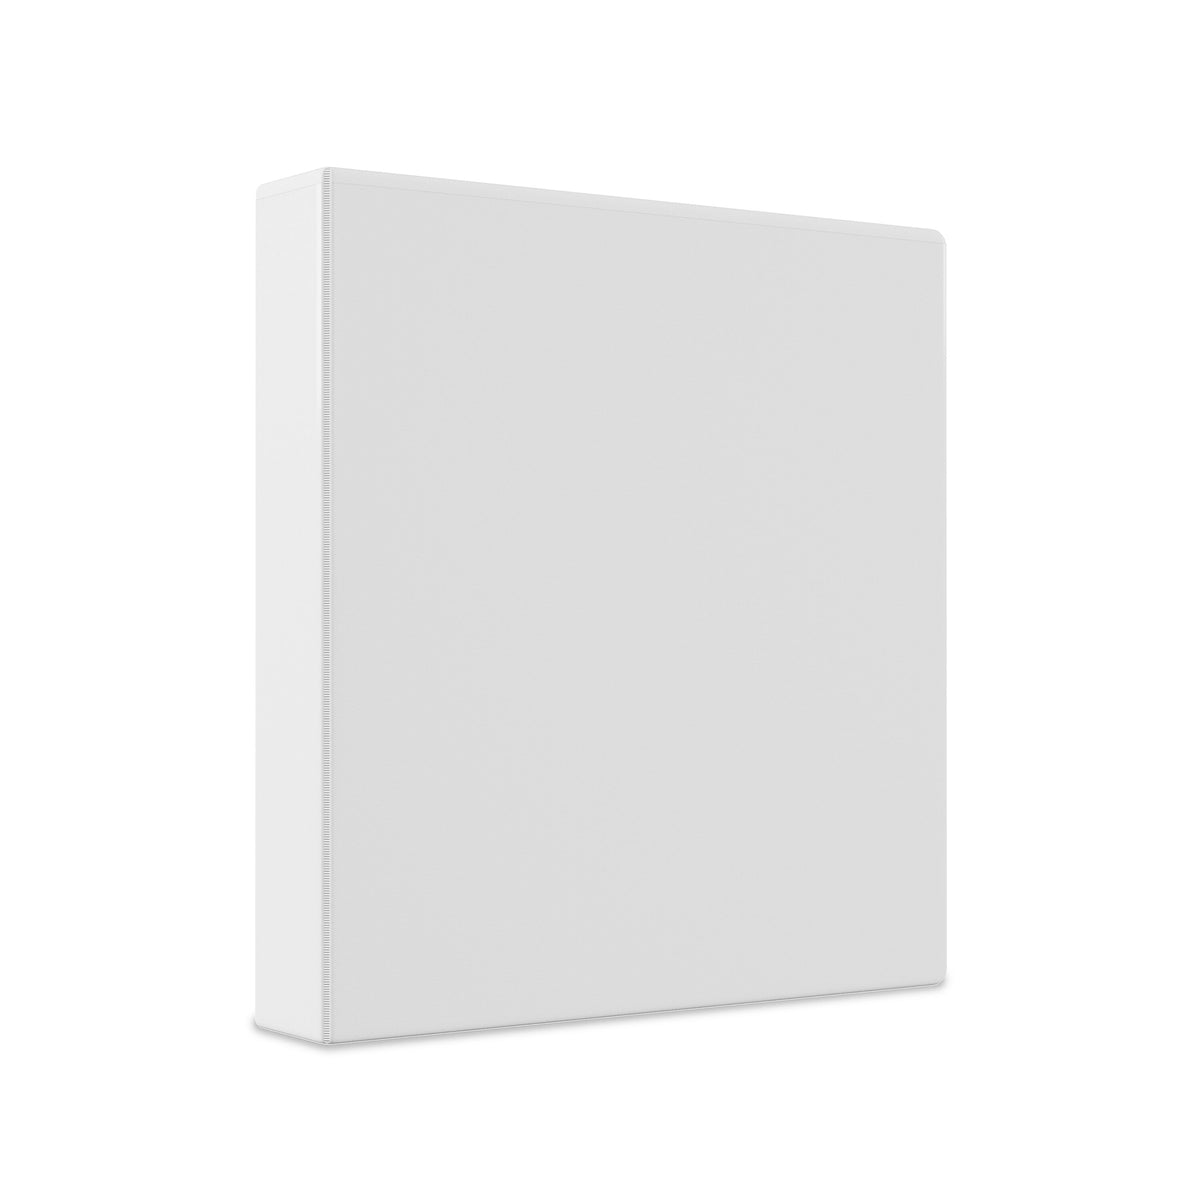 Staples 1 1/2" 3-Ring View Binders, White, 12/Pack